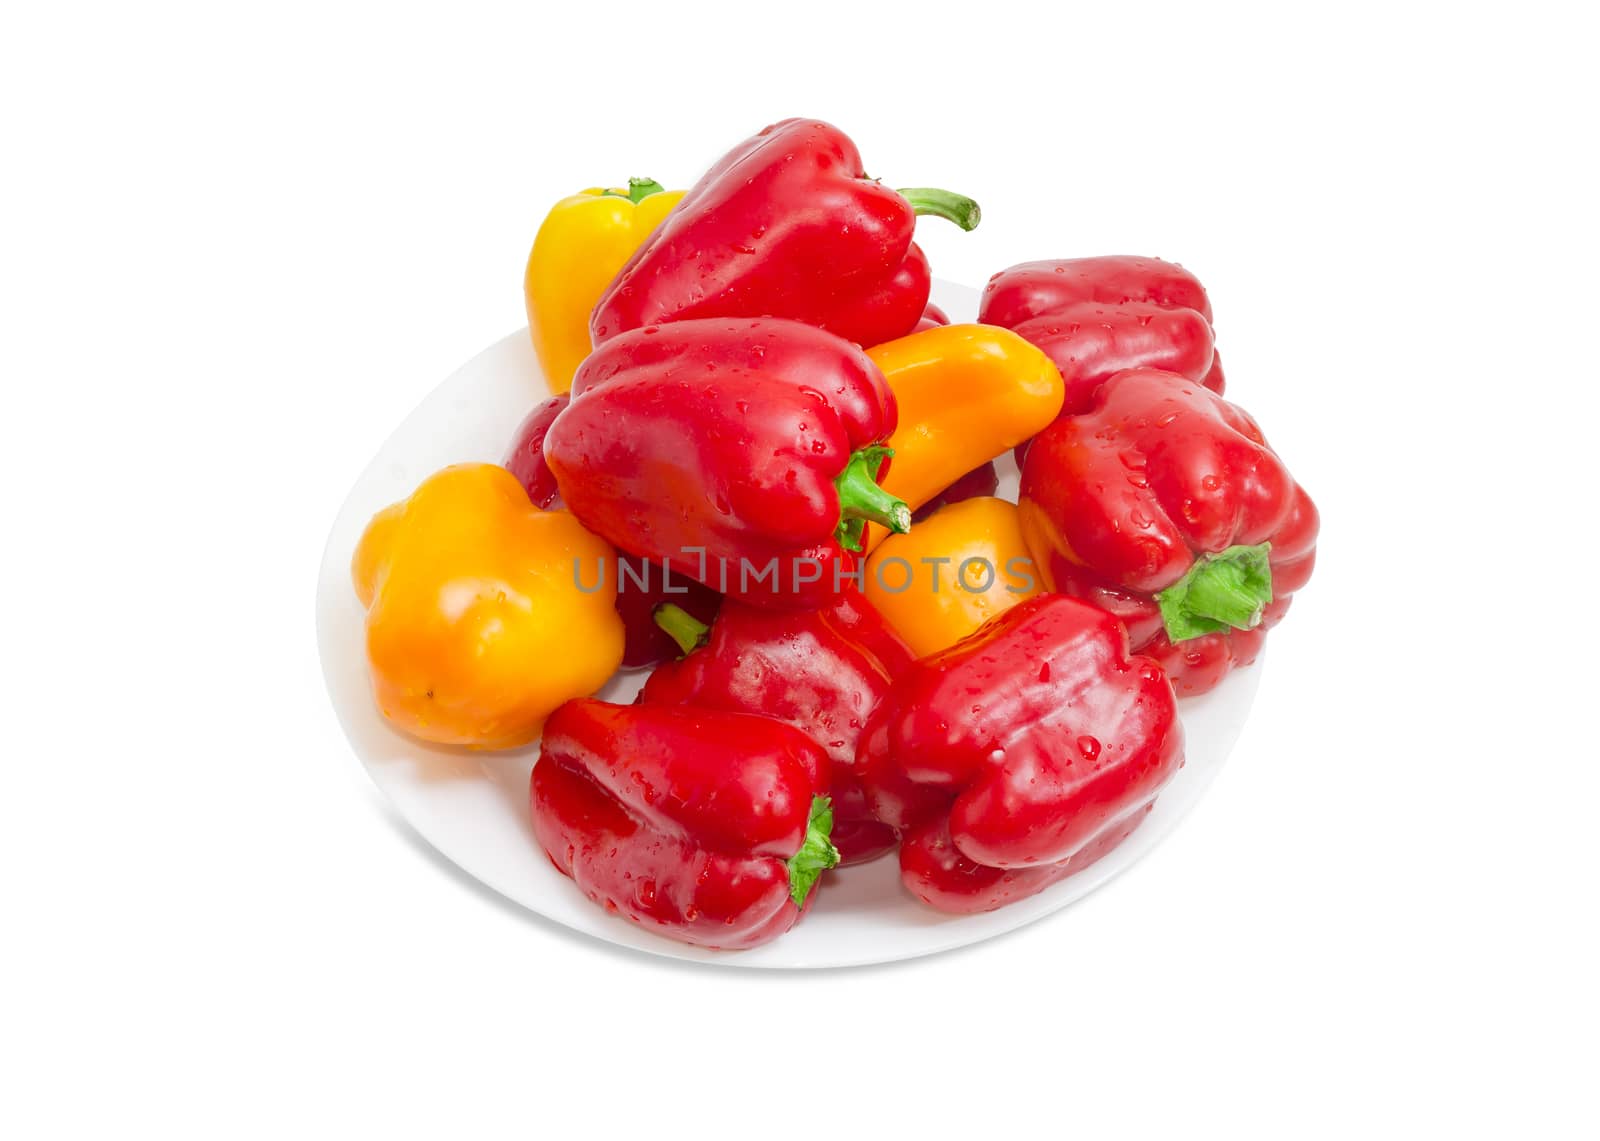 Washed red and yellow bell peppers with water drops on the white dish on a white background
